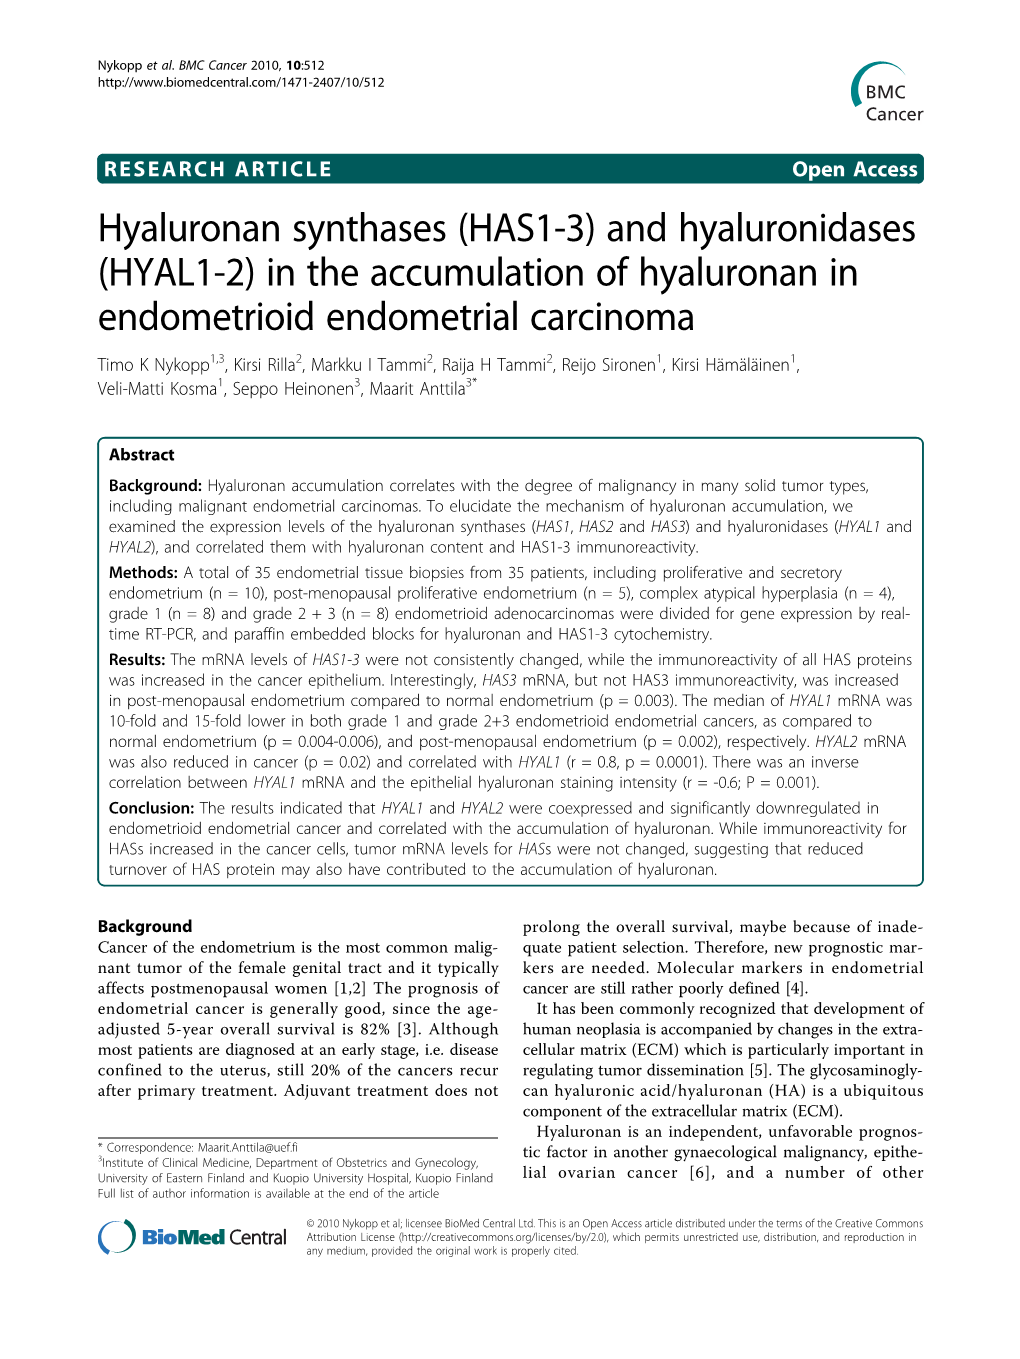 Hyaluronan Synthases (HAS1-3) and Hyaluronidases (HYAL1-2) in The